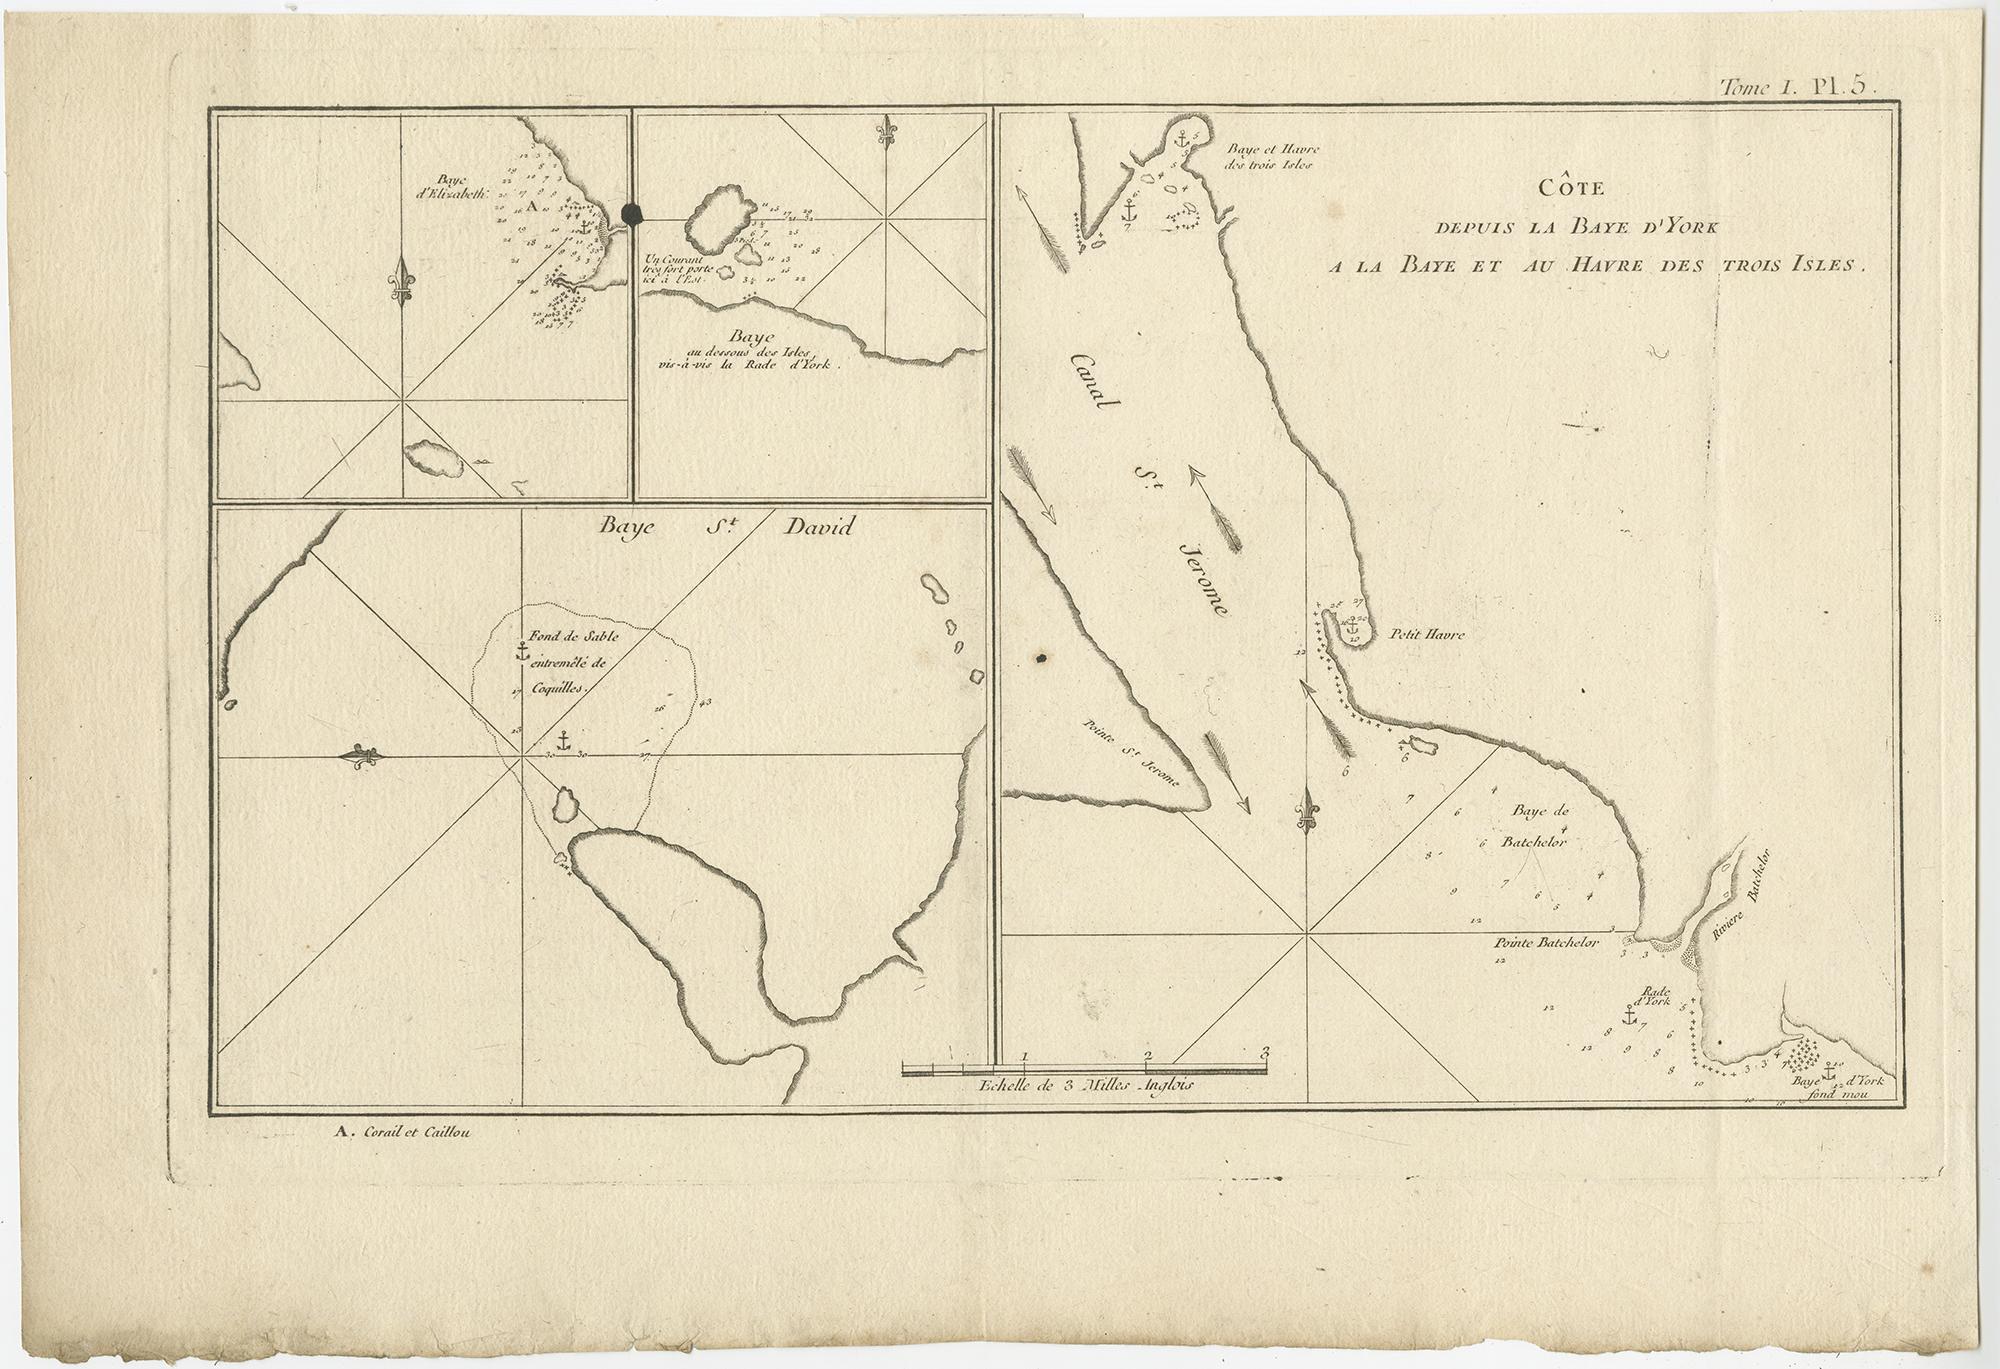 Antique map titled 'Côte depuis la Baye d'York (..)'. Charts of York's Bay, Haven of the Three Islands, St. David's Bay, and Elizabeth's Bay. 

Published in an edition of John Hawkesworth's atlas to accompany a French edition of Captain James